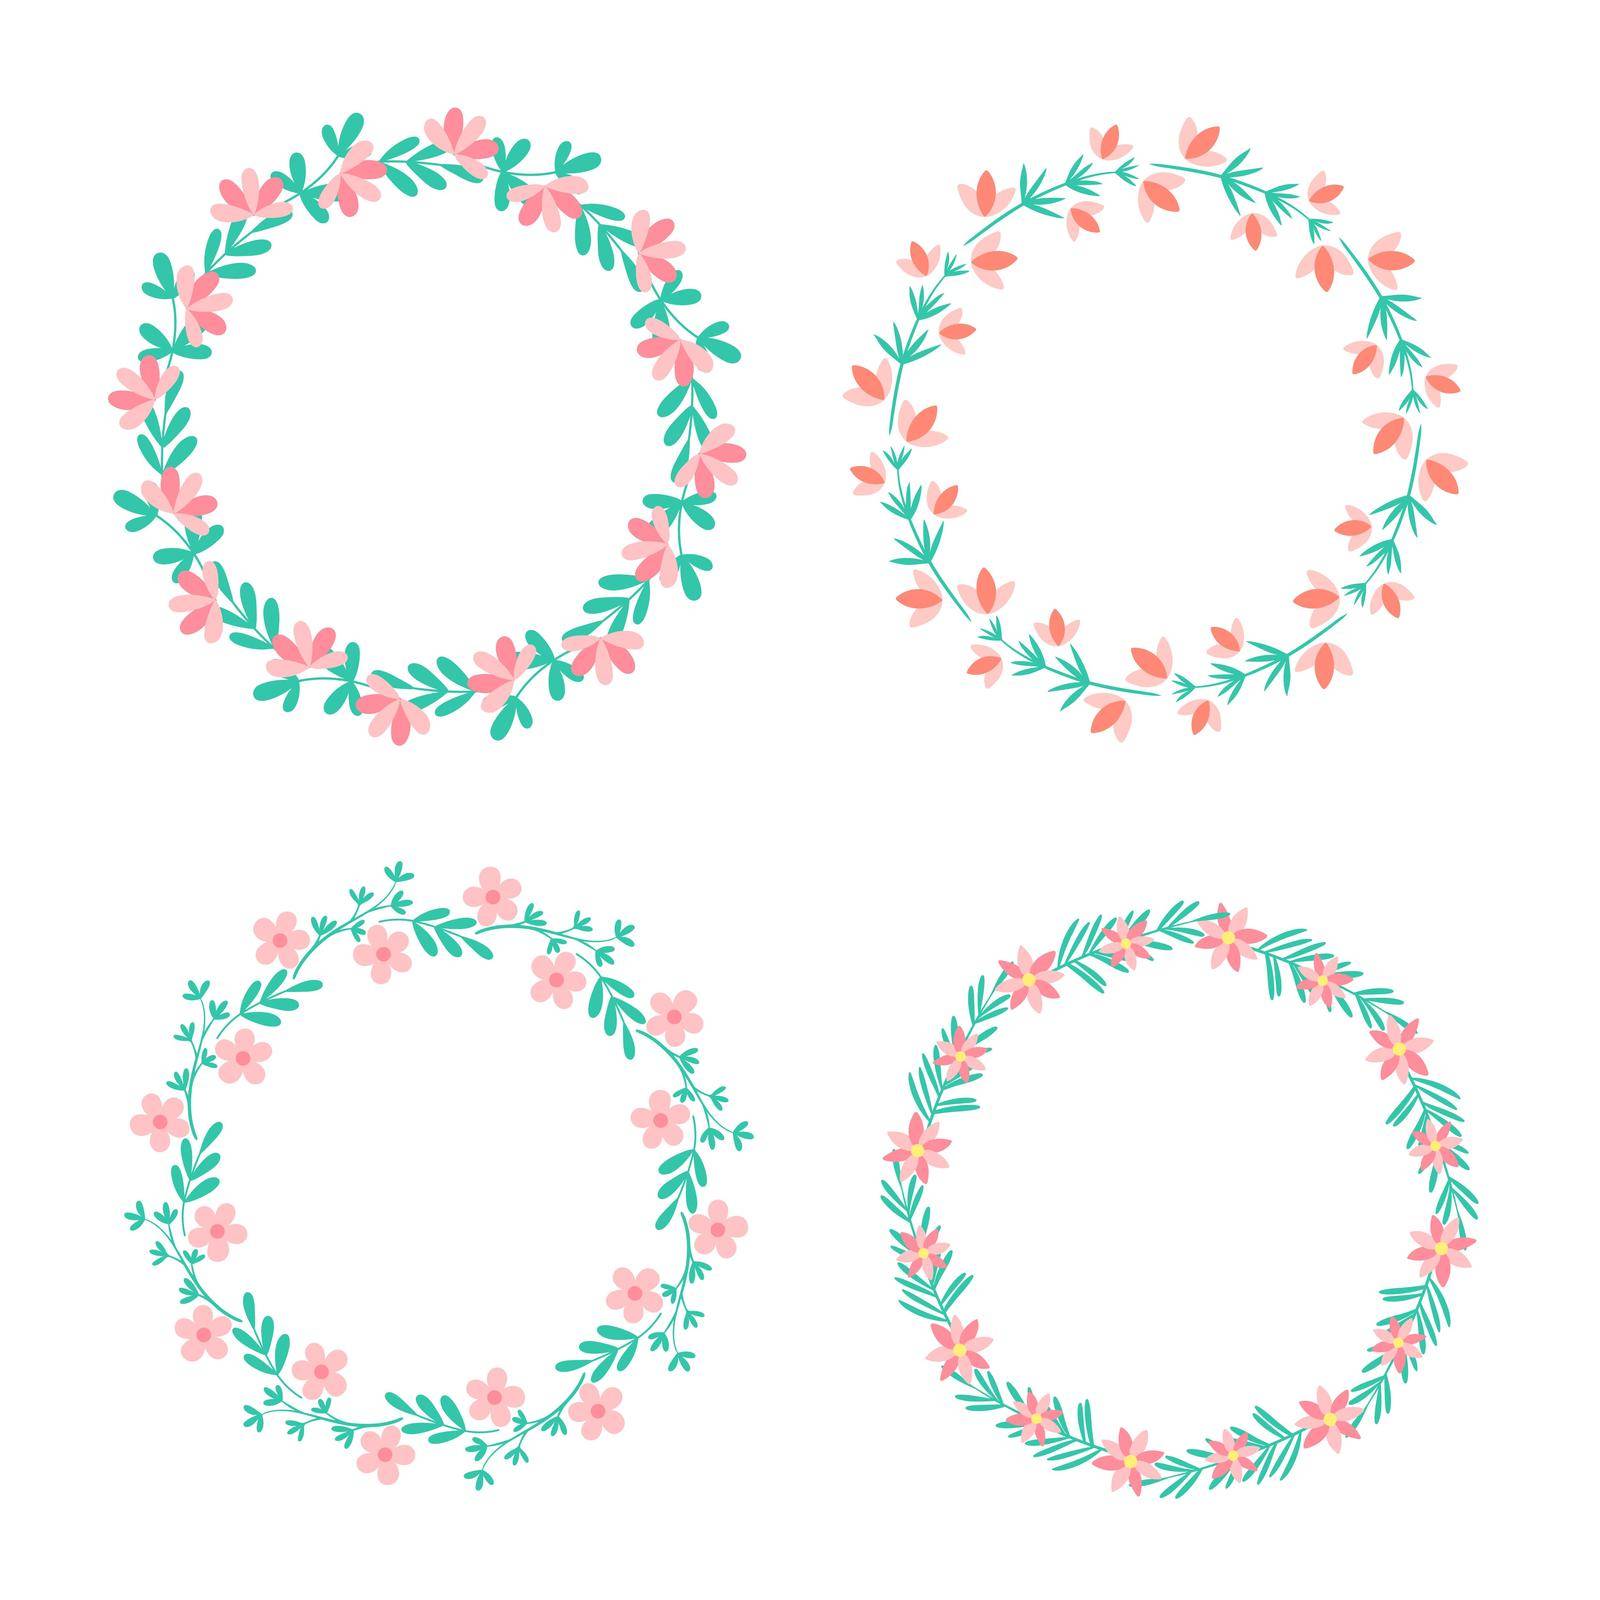 Round wreaths with spring and summer flowers set. Bunch floral template for postcards. Round frame for inscription with greenery. Vector illustration botanical and floral rim elements